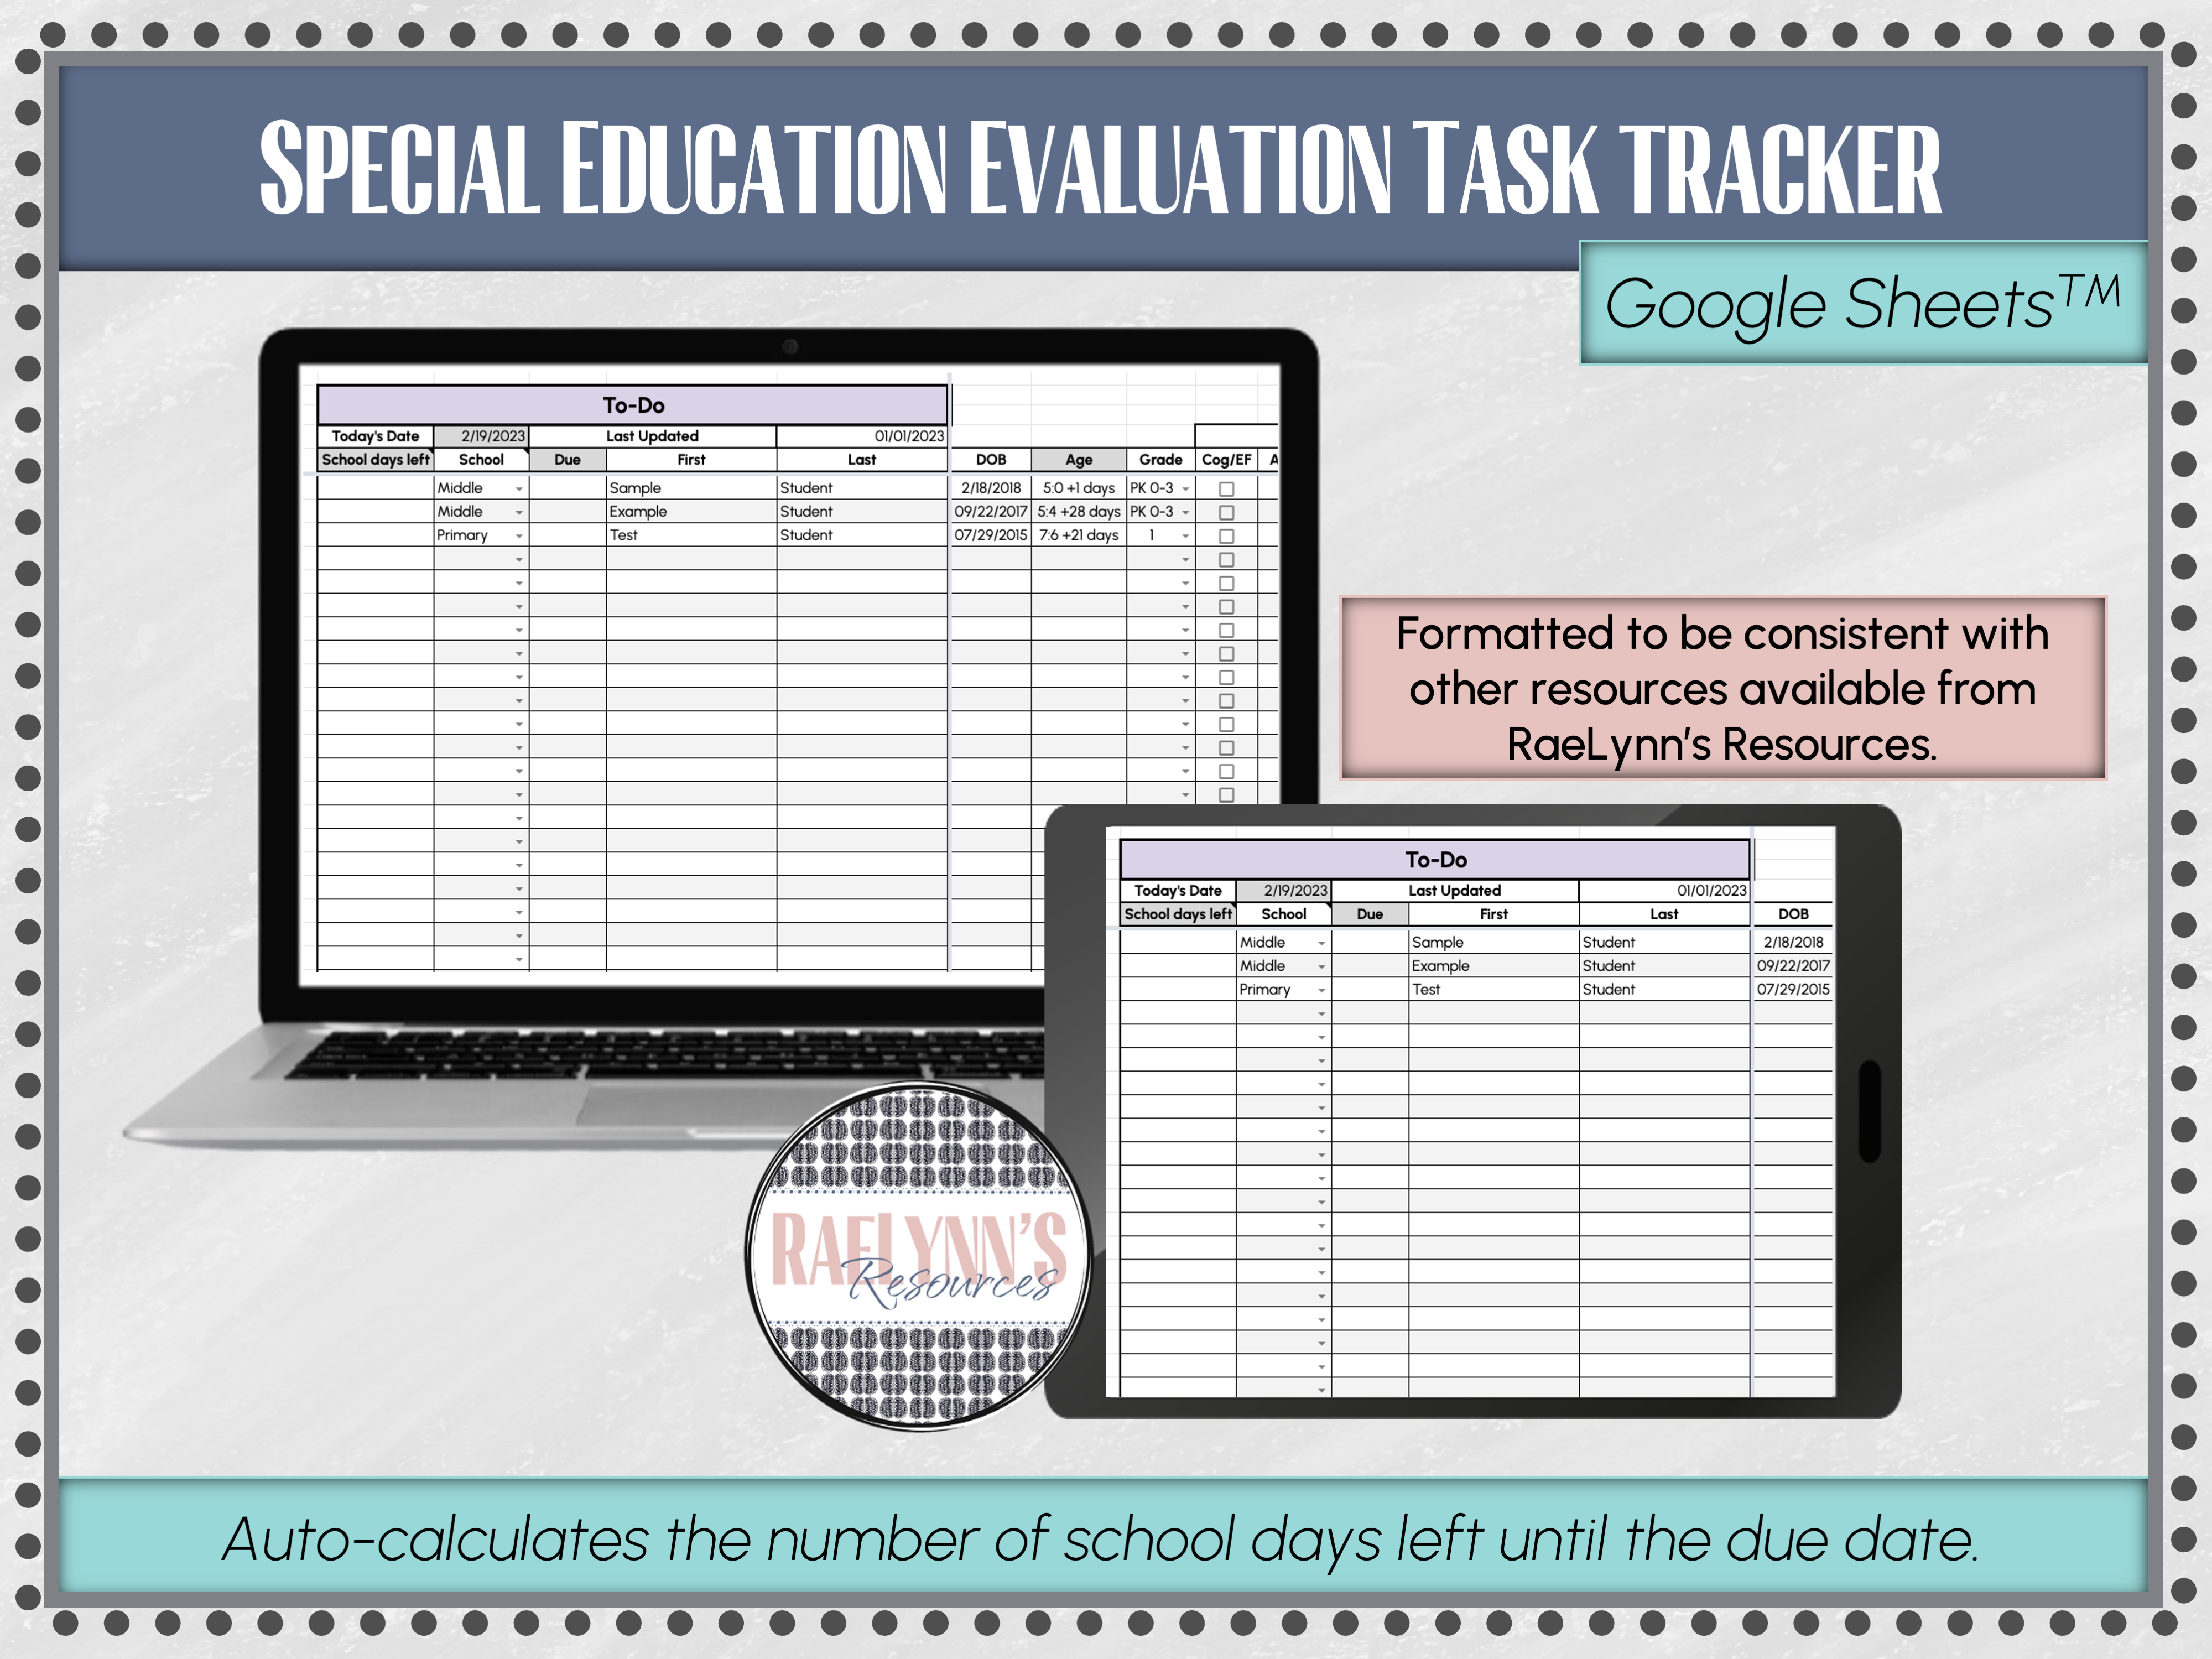 To-Do List and Task Tracker for Special Education Evaluations - Google Sheets